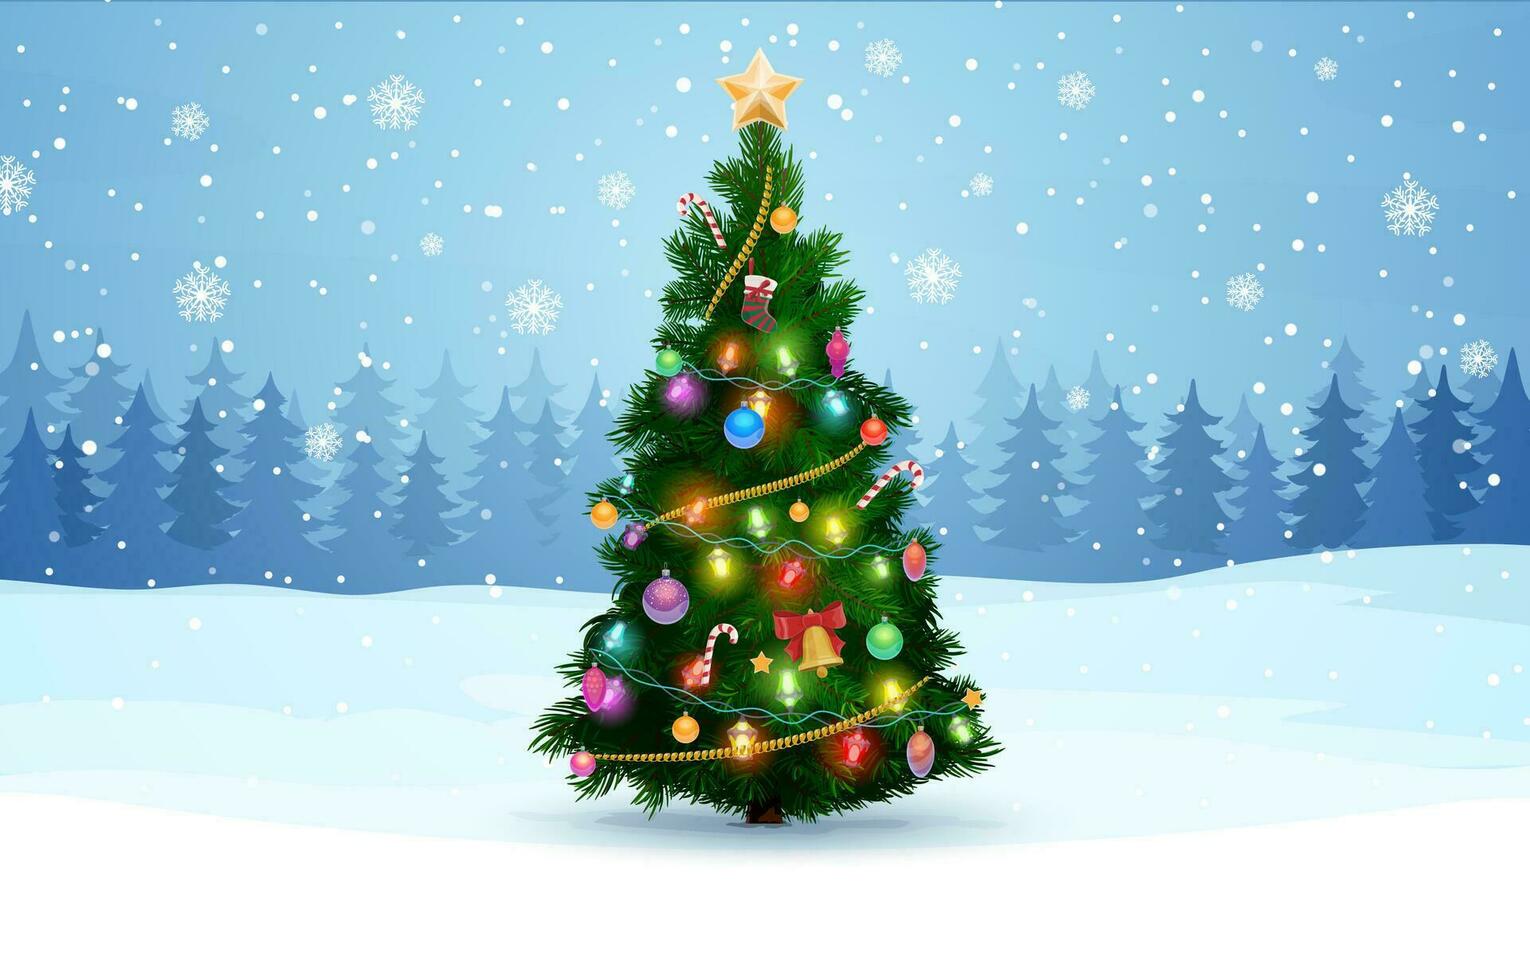 Christmas tree and forest silhouette landscape vector